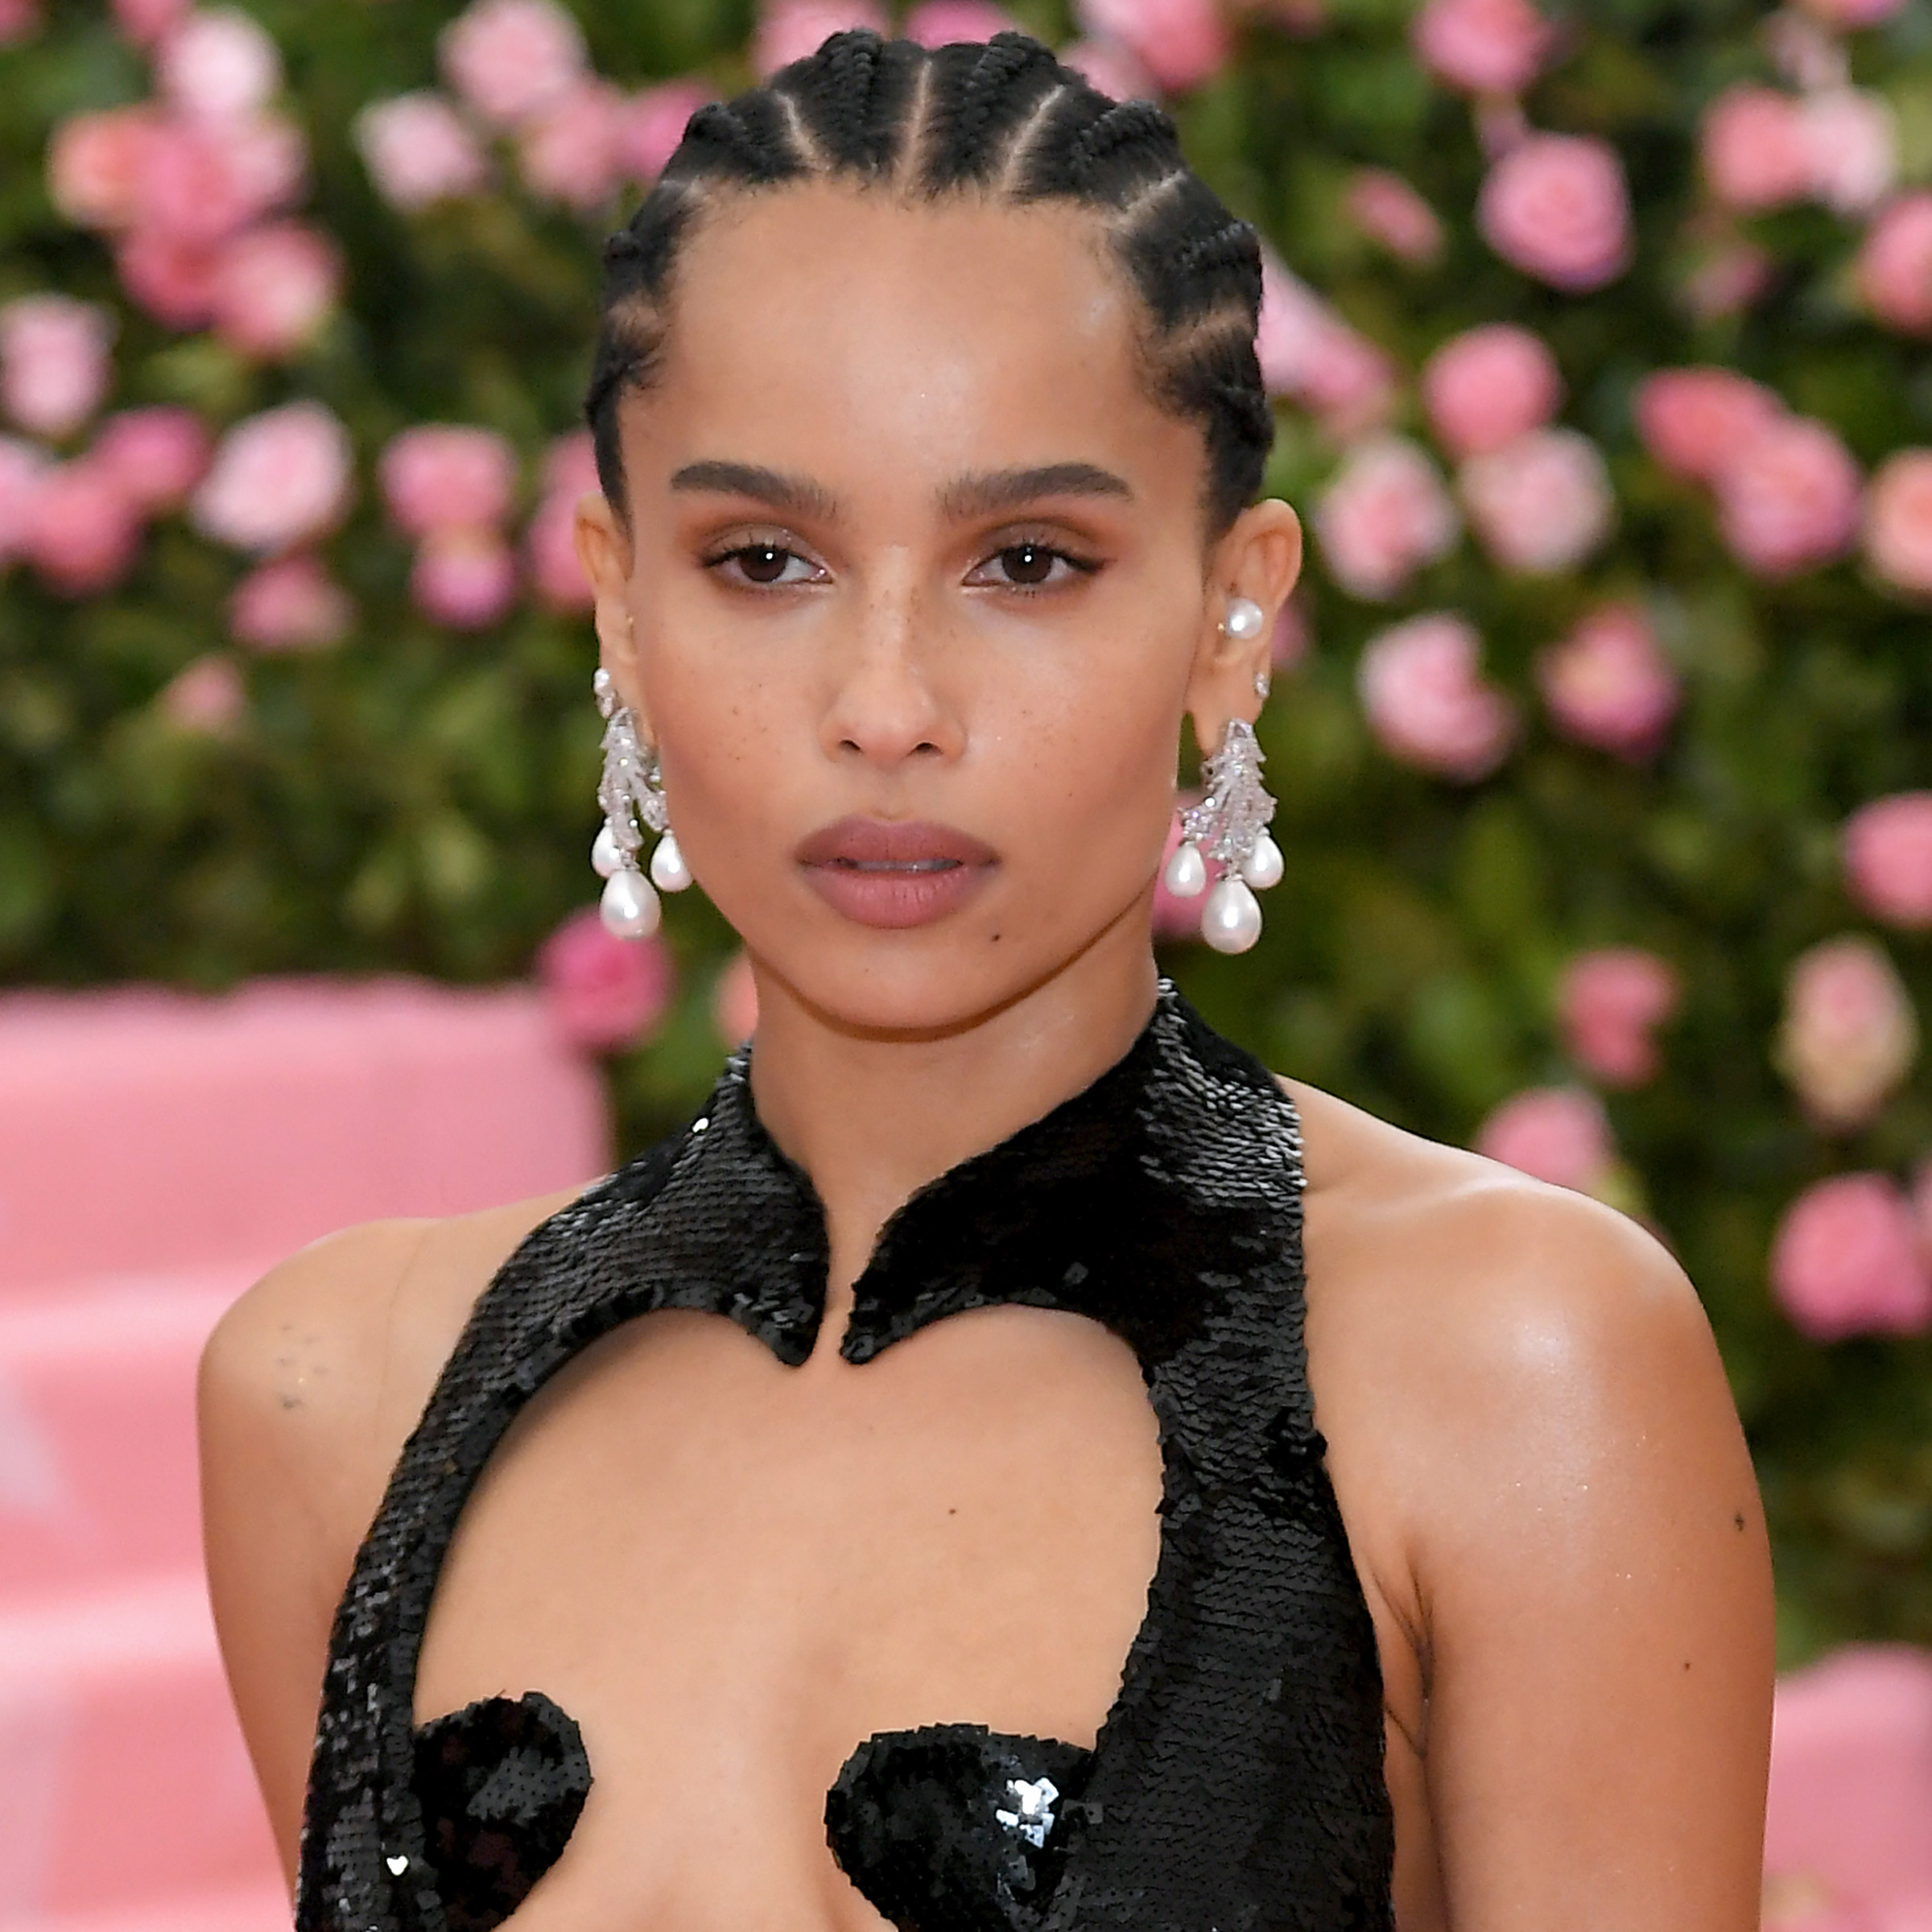 Girandole-style diamond earrings with pearls from Anabela Chan worn by Zoë Kravitz at Met Gal 2019